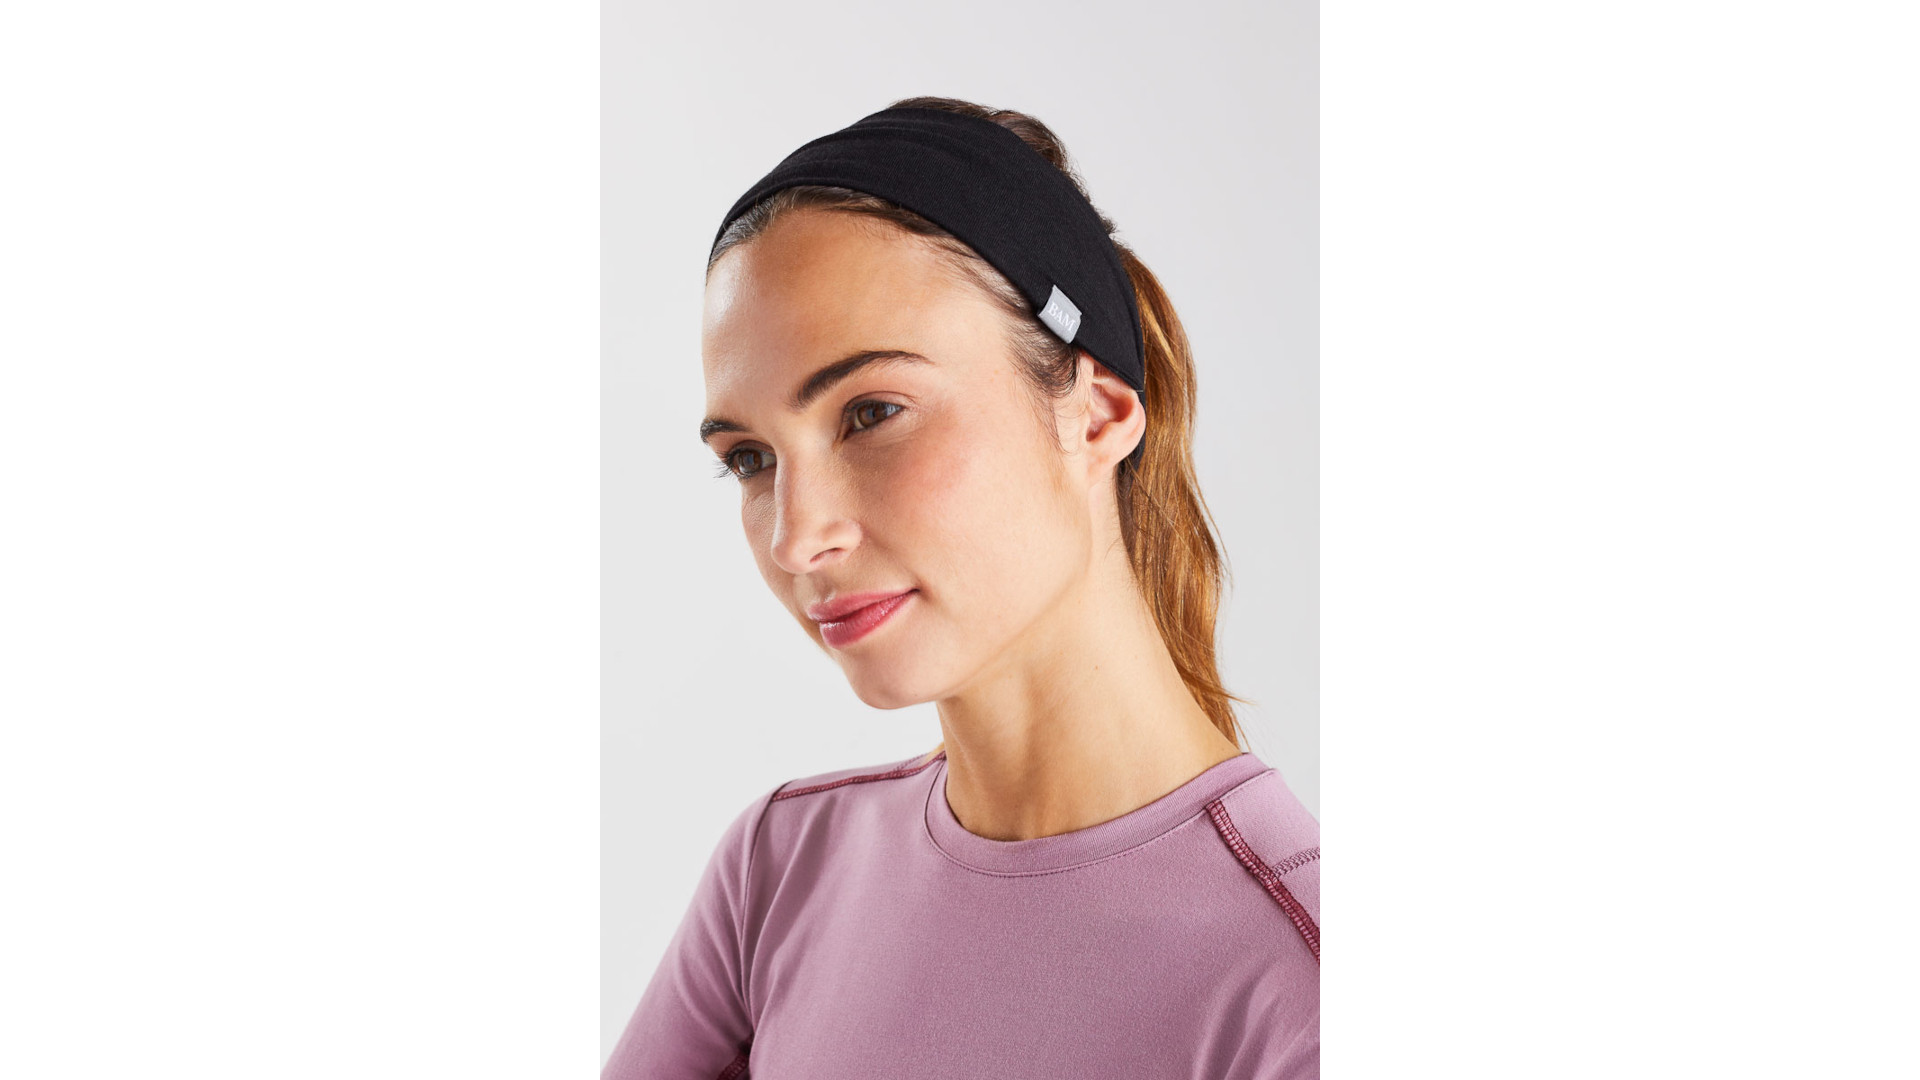 BAM Bamboo Headband review: cute, comfortable and climate positive ...